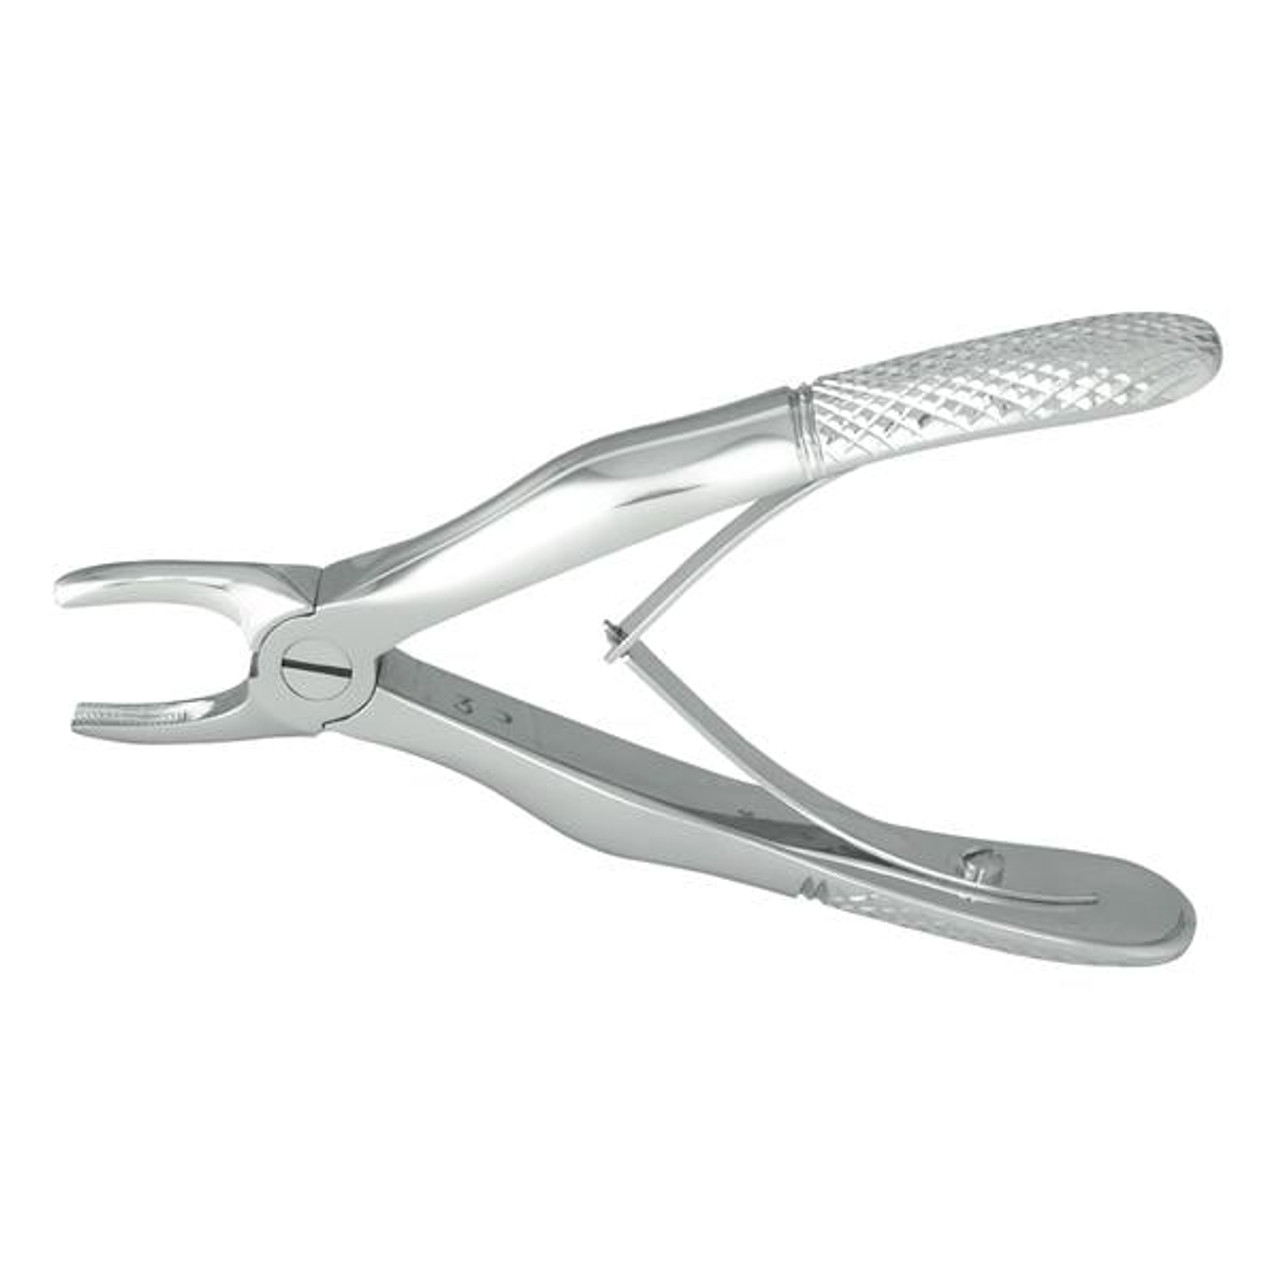 Nordent - Extraction Forceps - Klein, Upper Incisors - Klein, Up